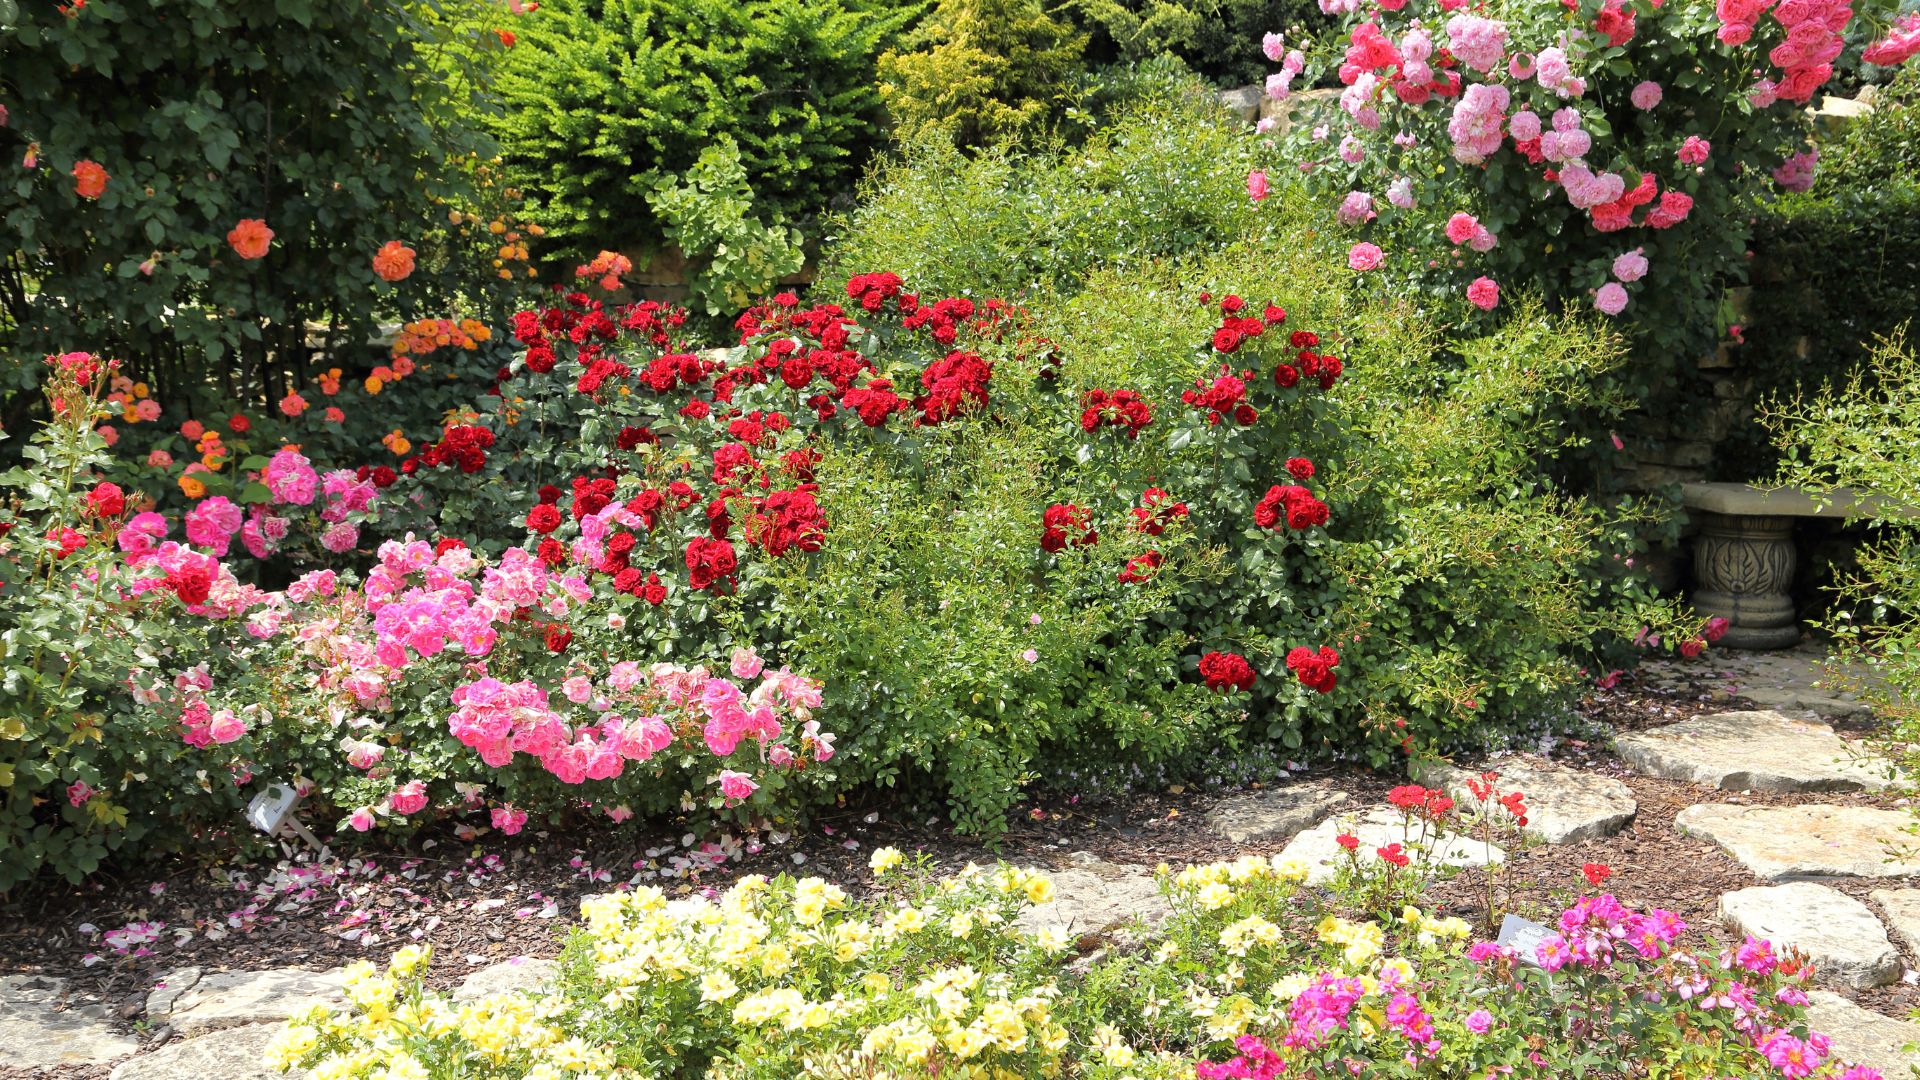 Rose garden with a stone pathway